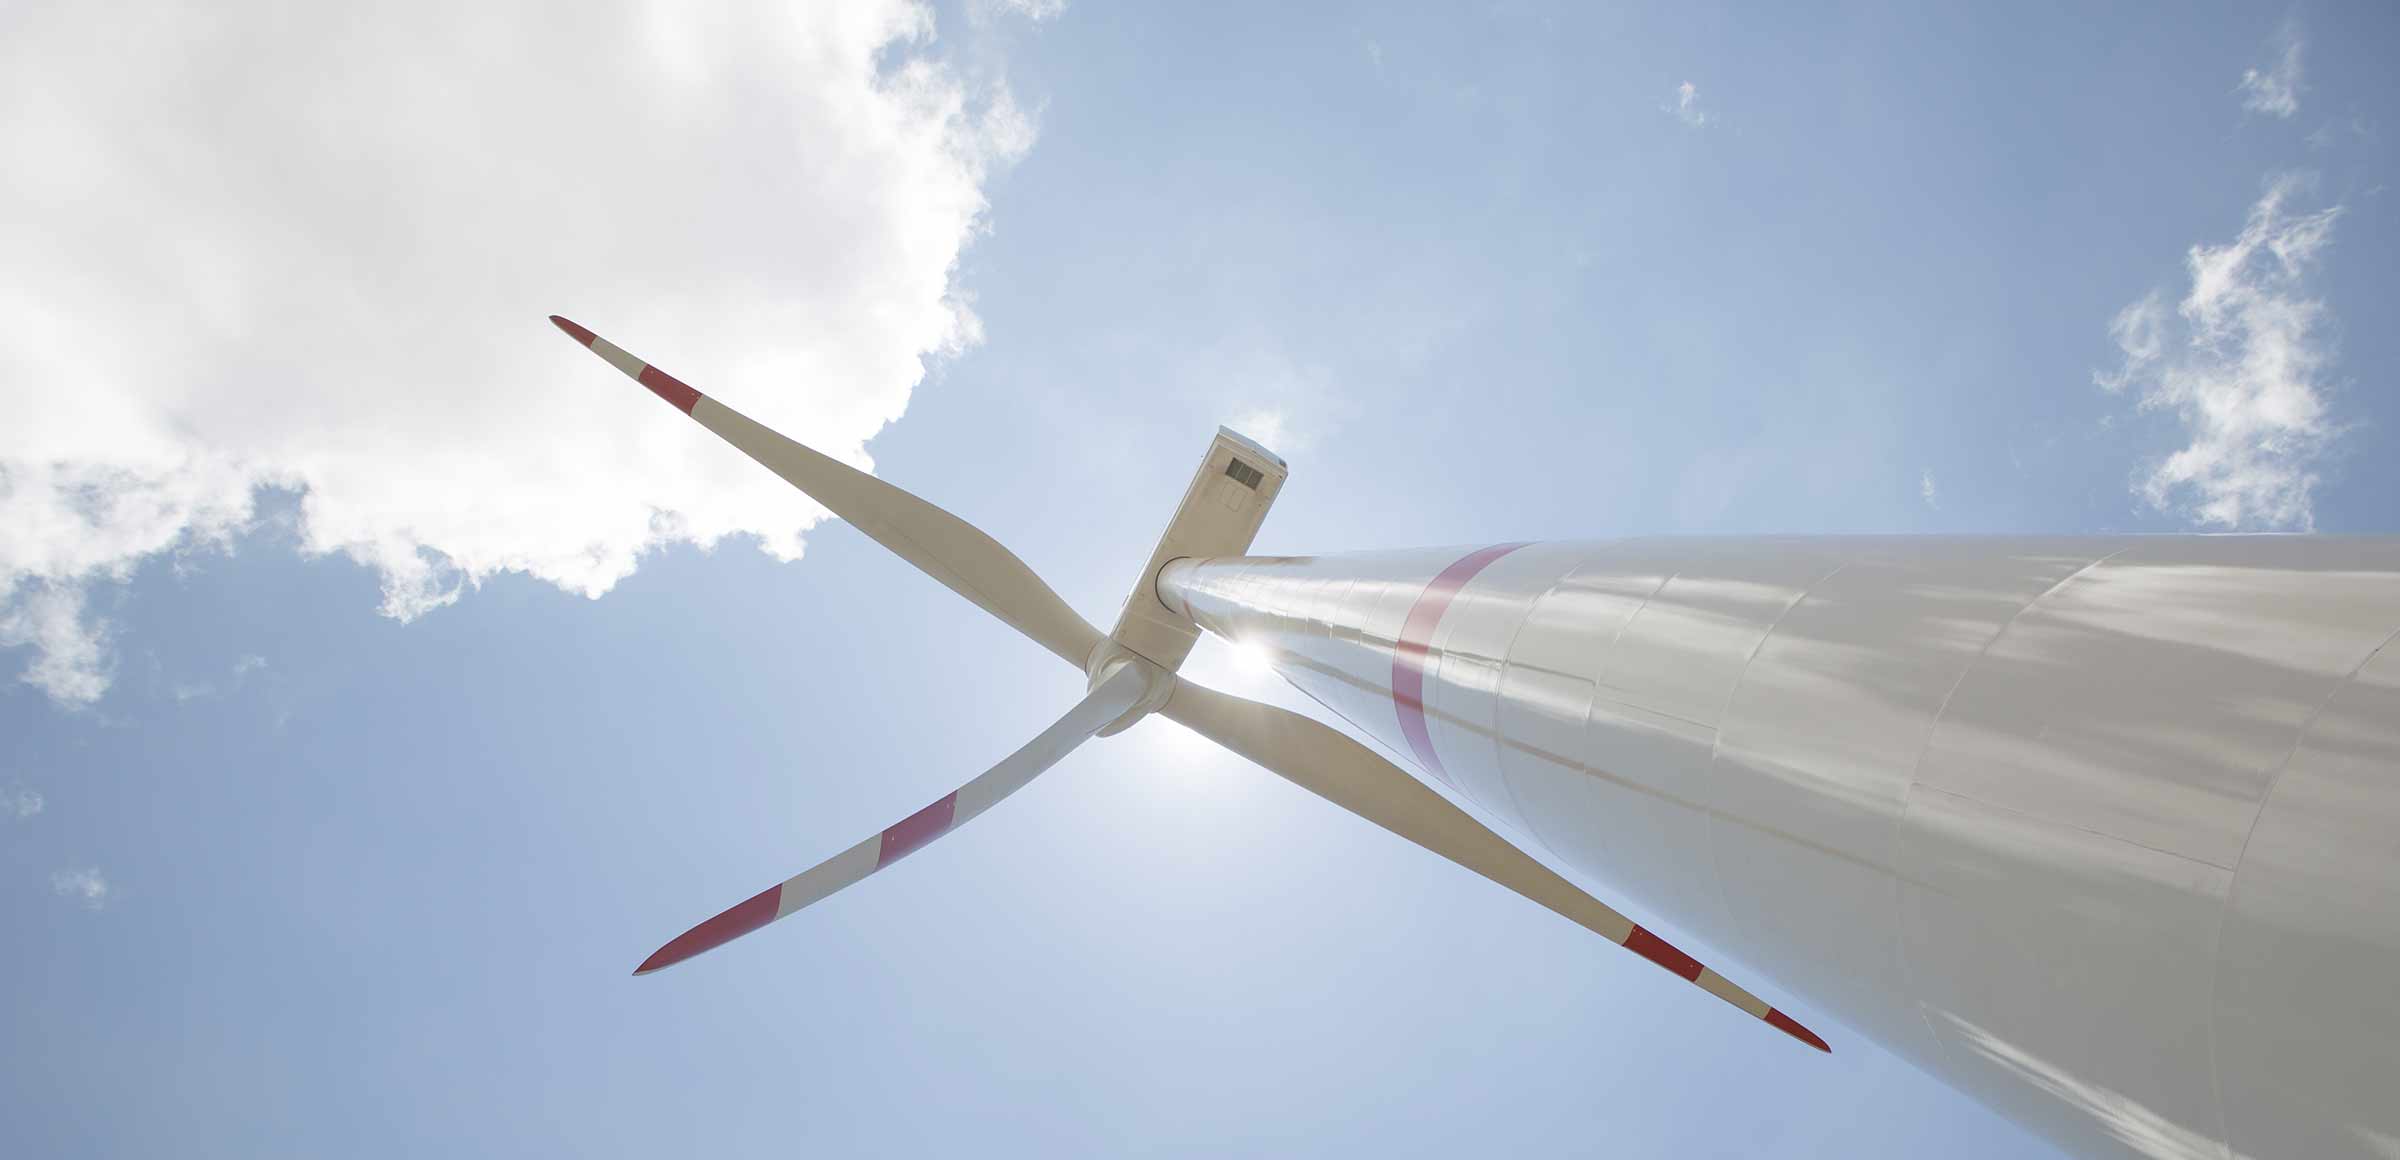 Wind turbine: what it is, parts and working